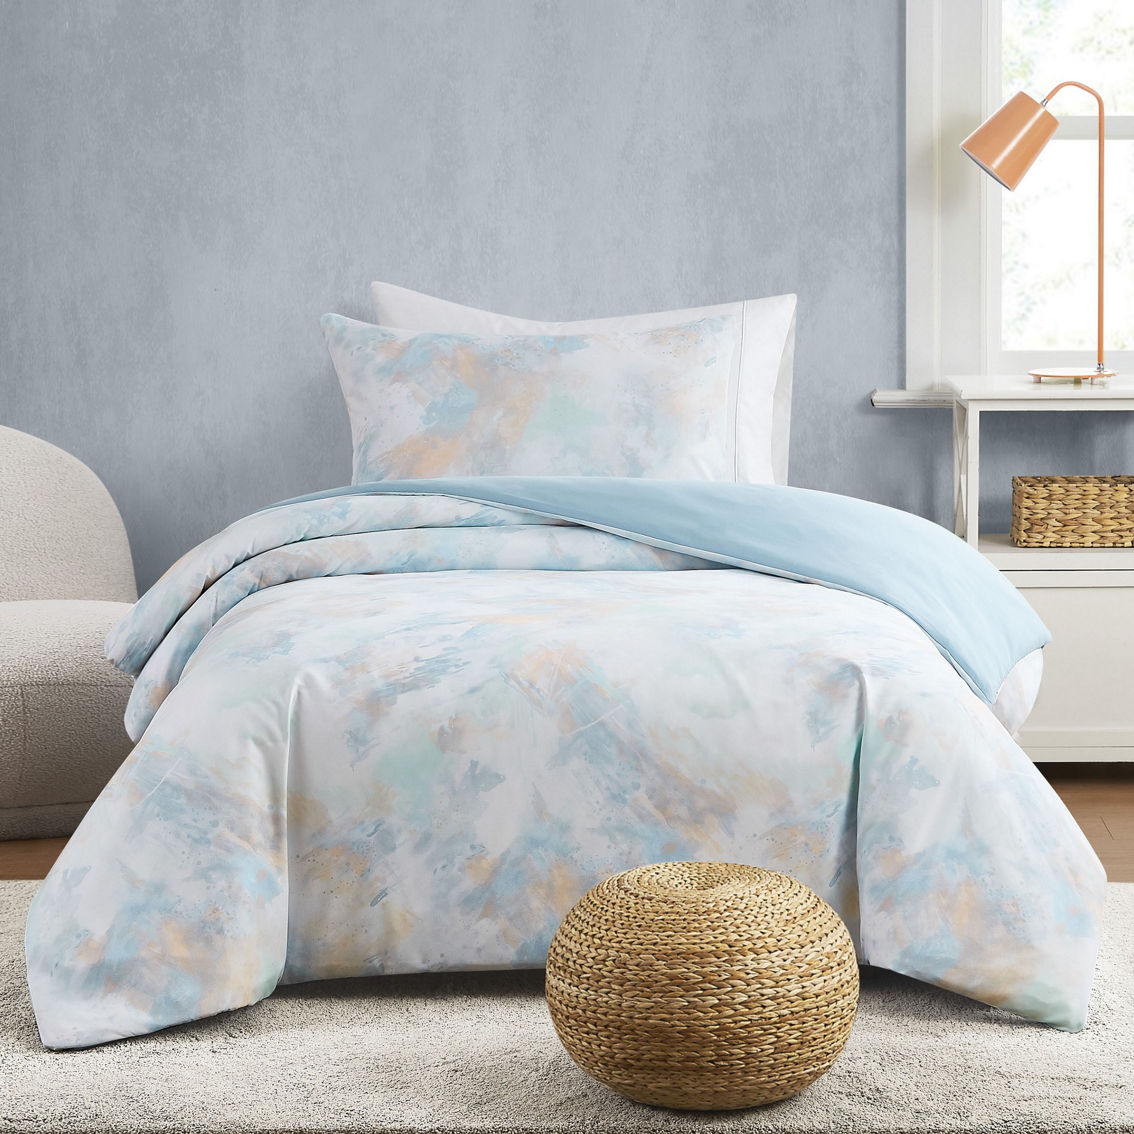 Truly Soft Hannah Watercolor Duvet Cover Set - Image 2 of 6